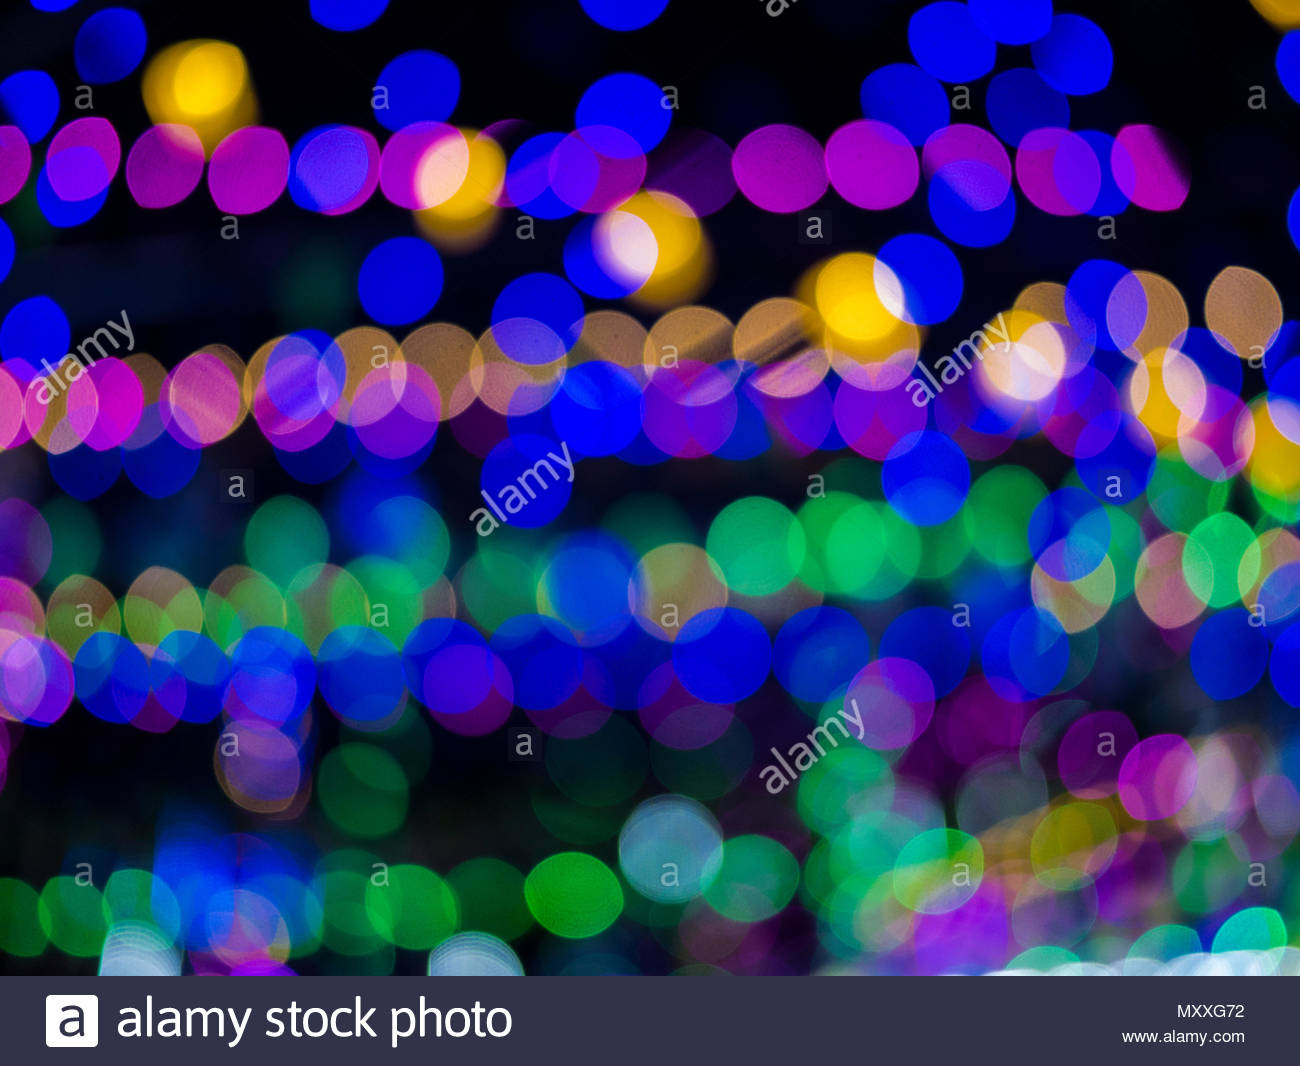 Abstract Image Of Unfocused Multicolored Lights Shining In The